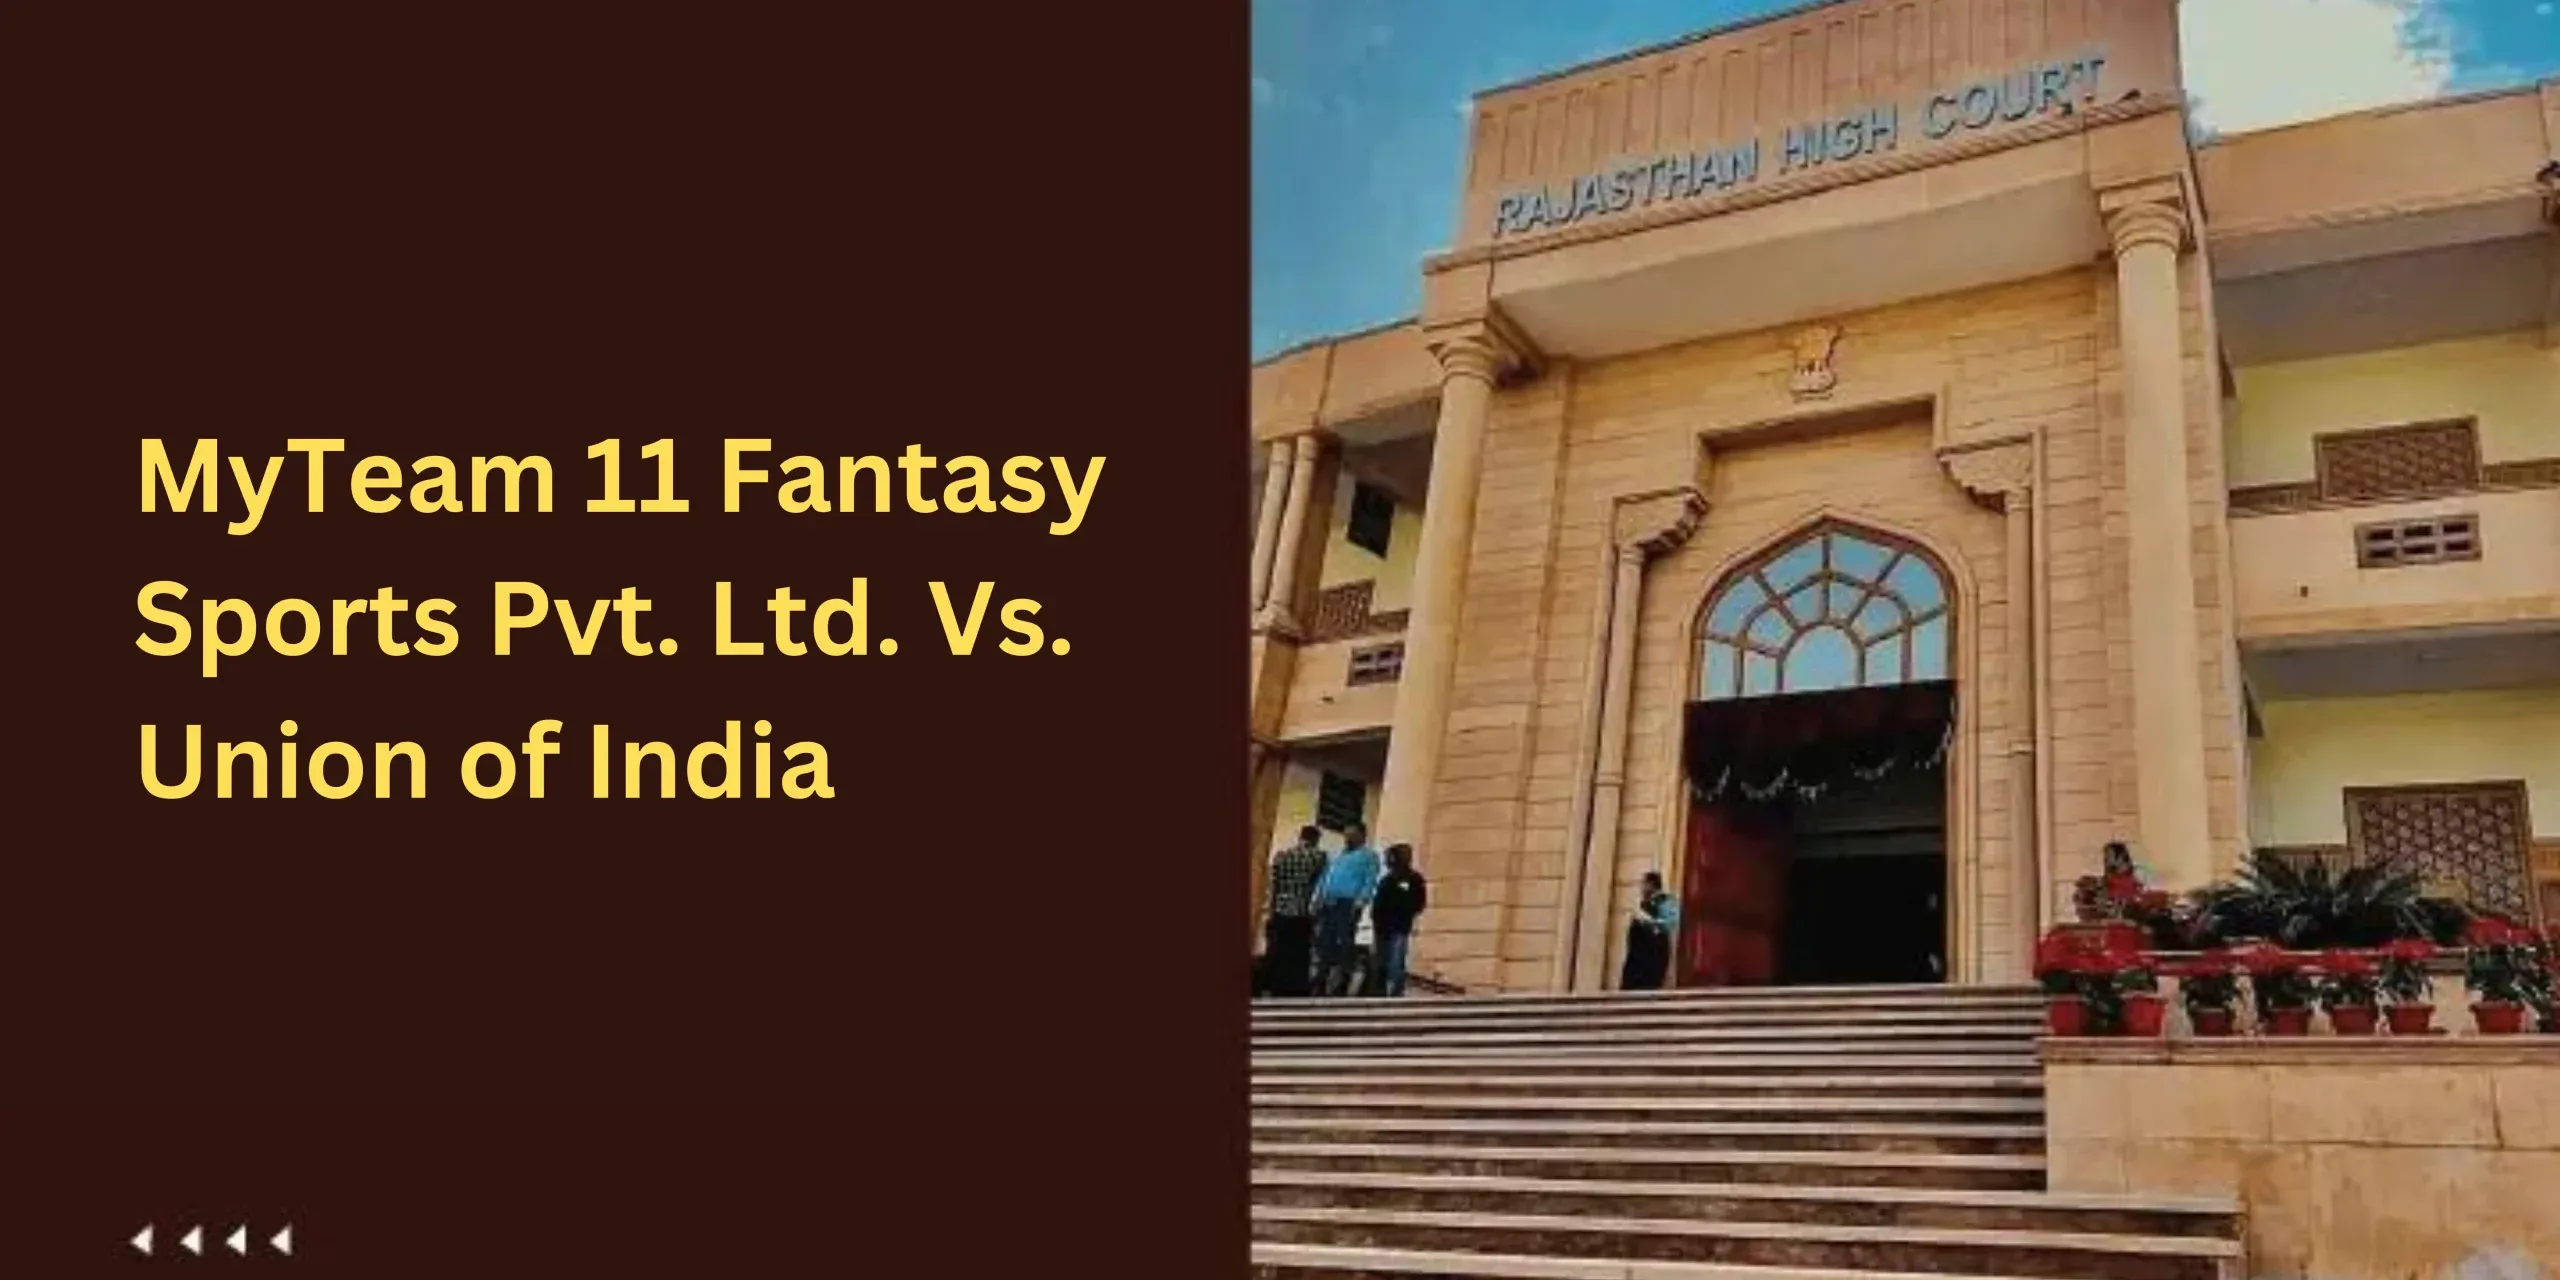 Decoding the order in the matter of Myteam 11 Fantasy Sports Pvt. Ltd. Vs. Union of India.